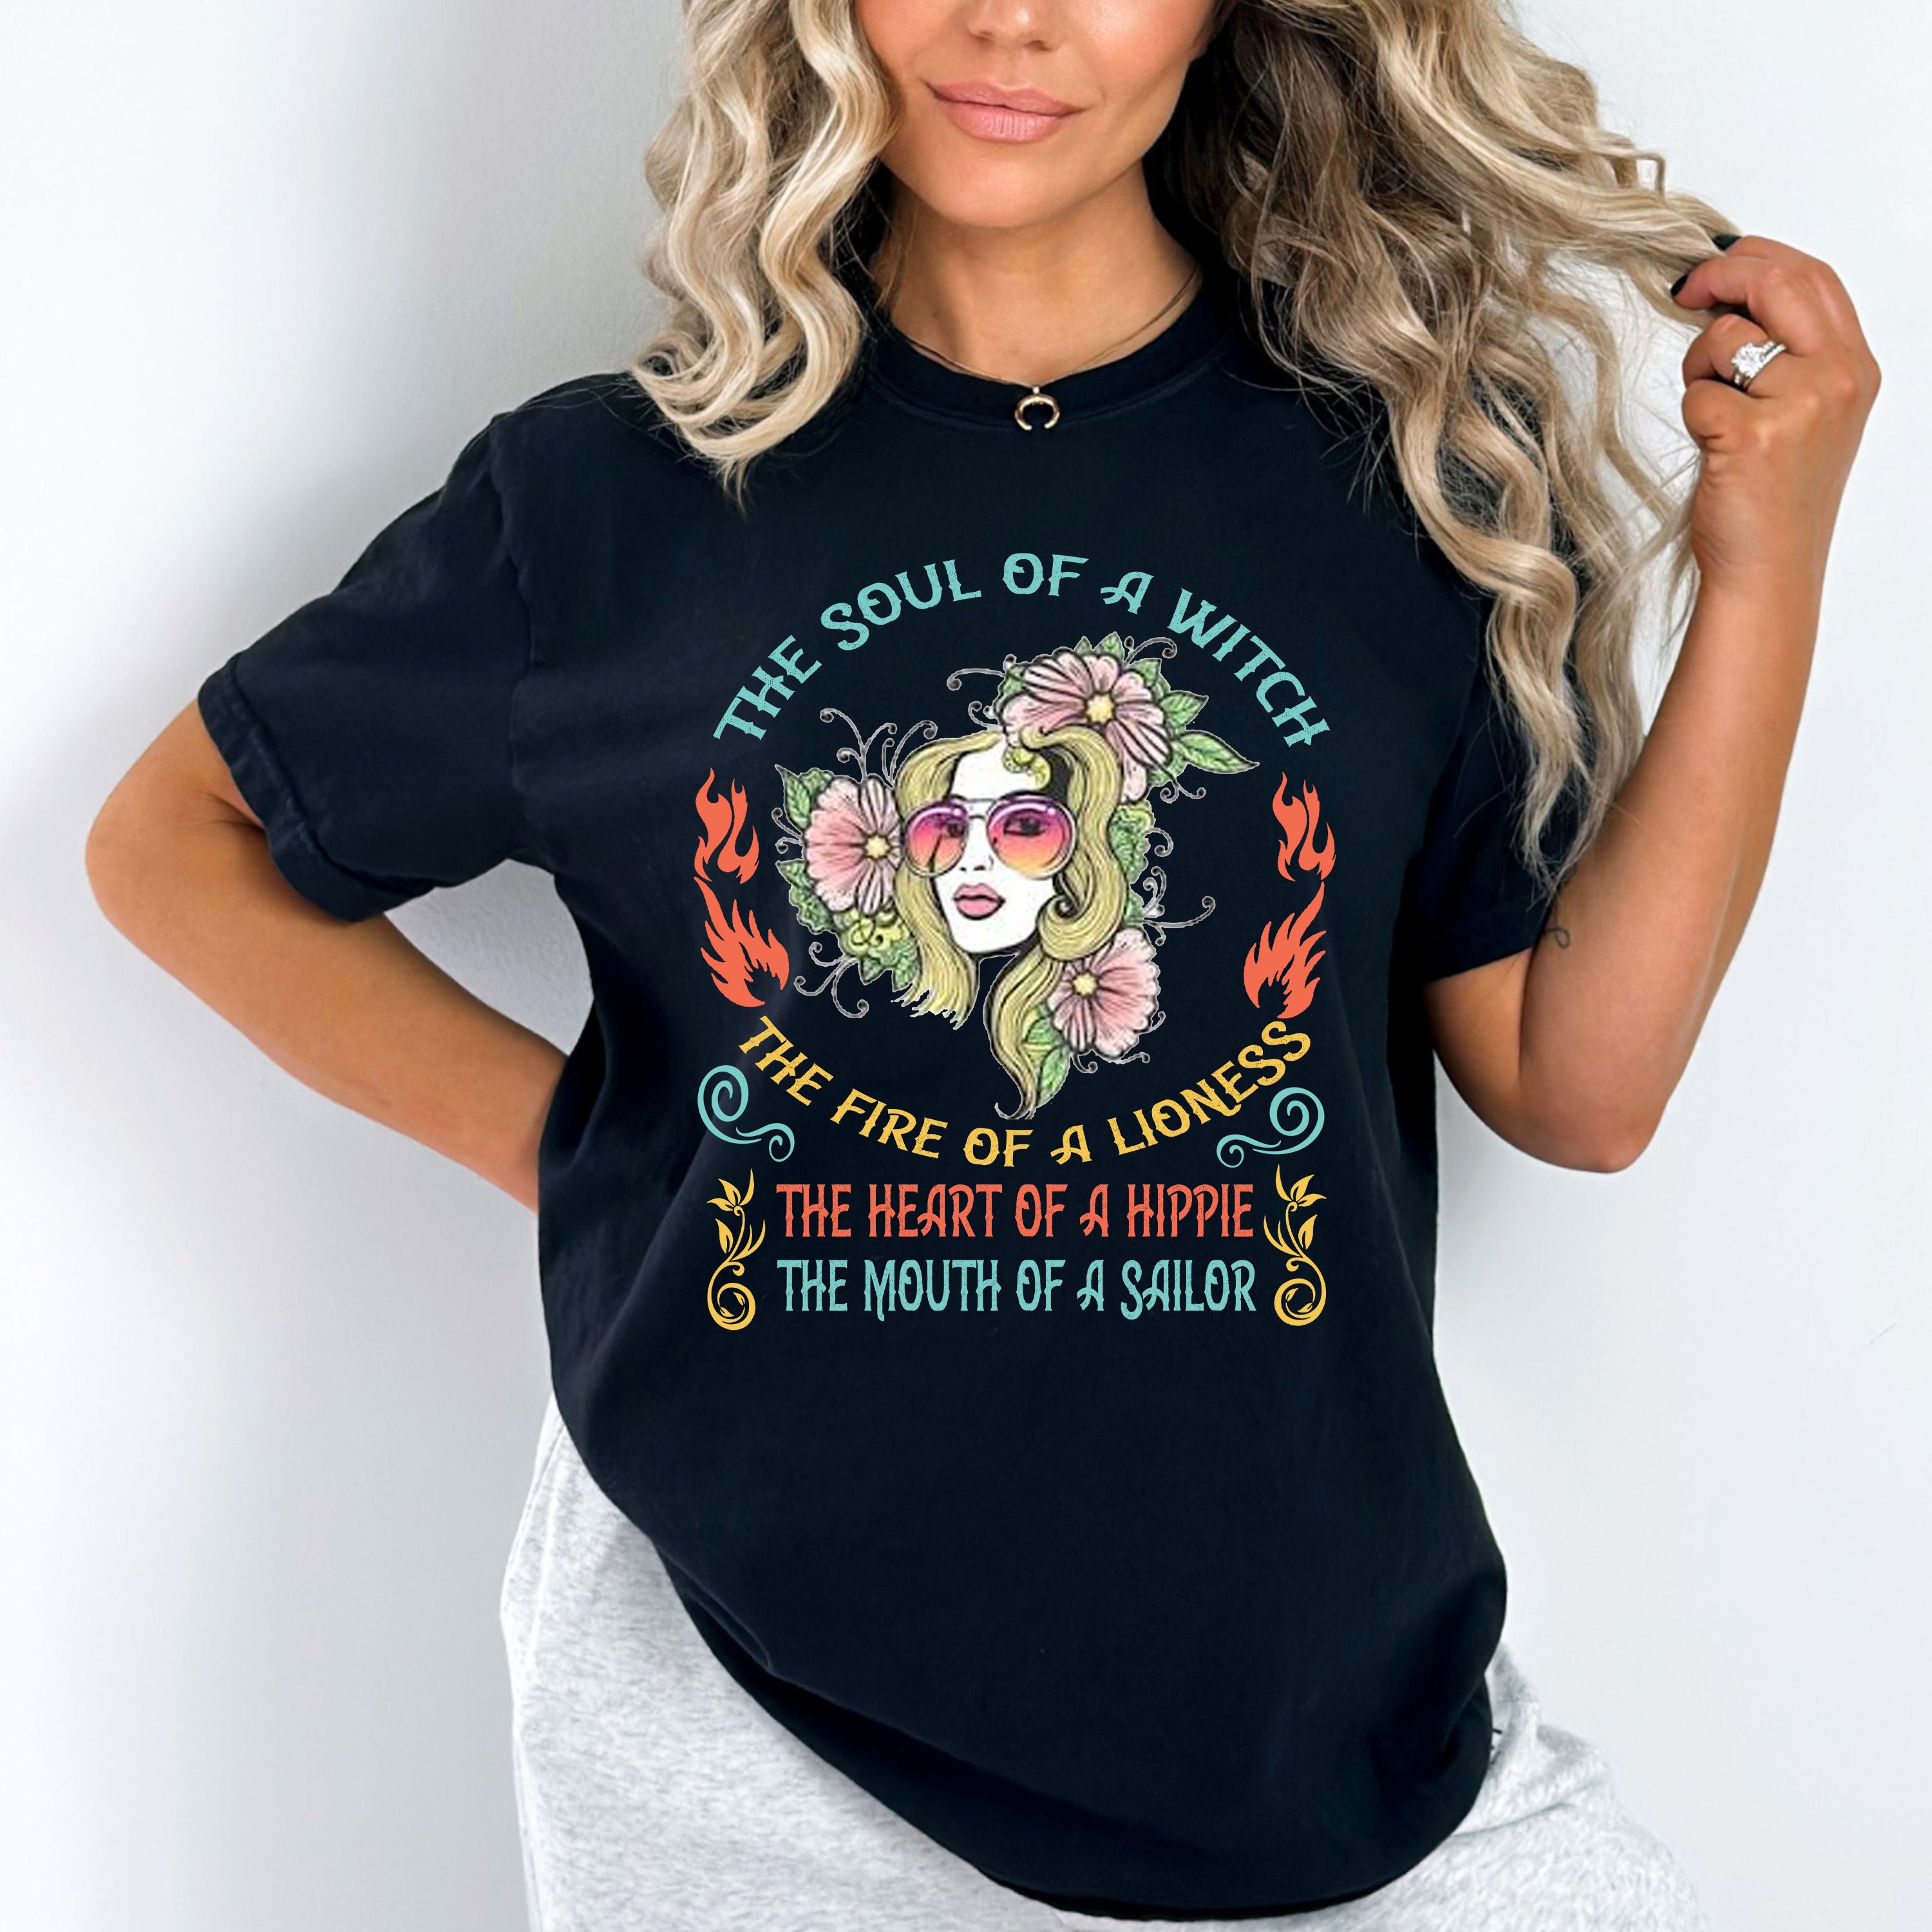 "The Soul Of A Witch The Fire Of A Lioness..." T-Shirt.